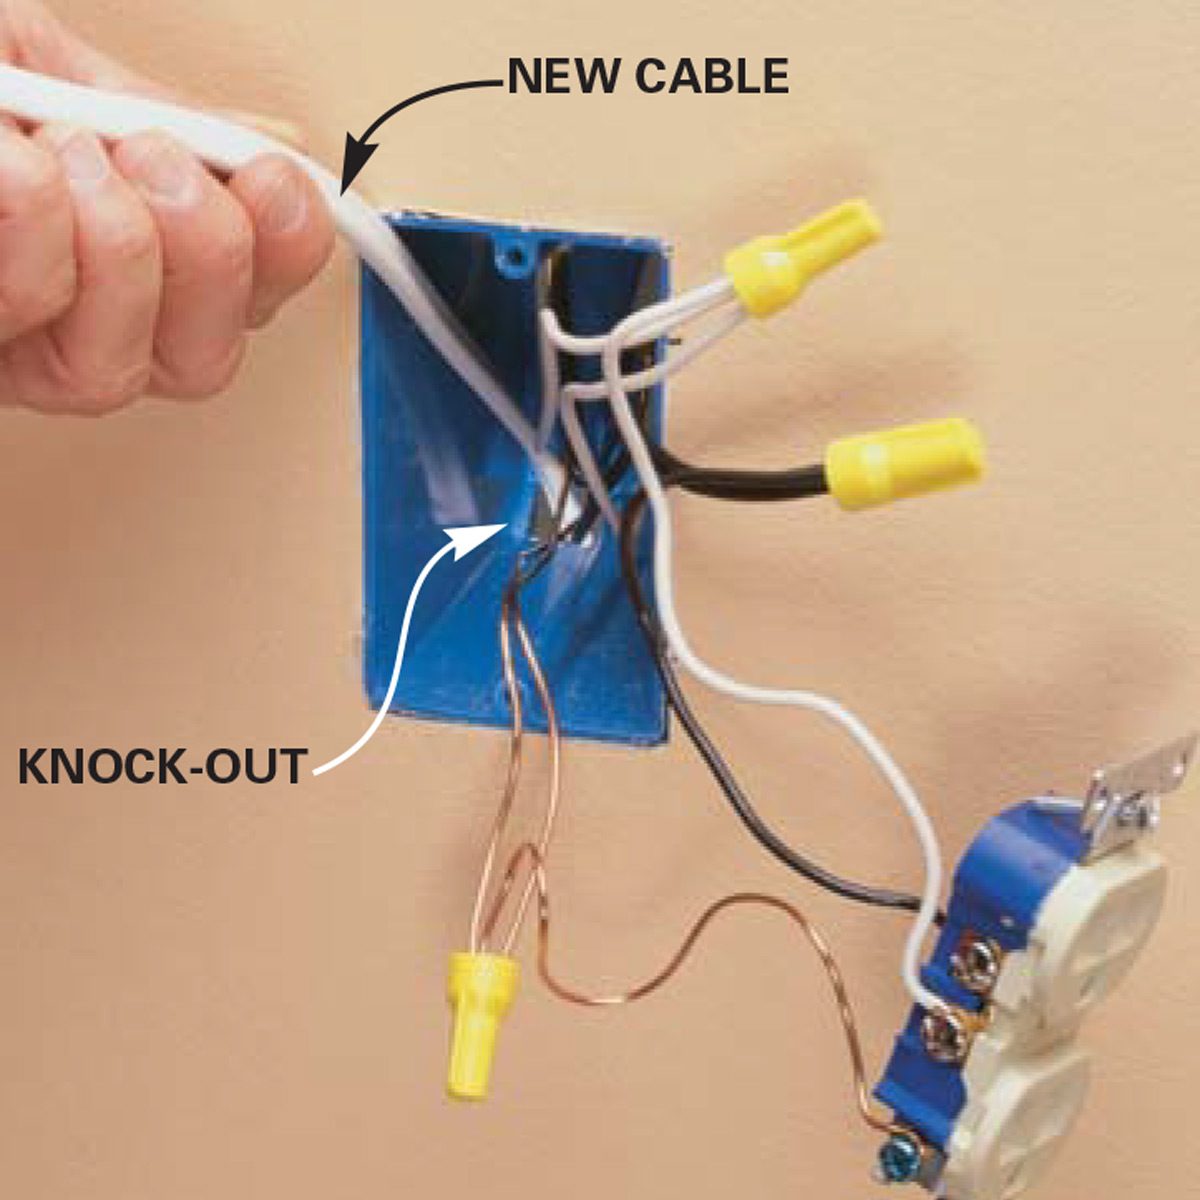 How To Wire An Electrical Outlet - Addicted 2 Decorating®